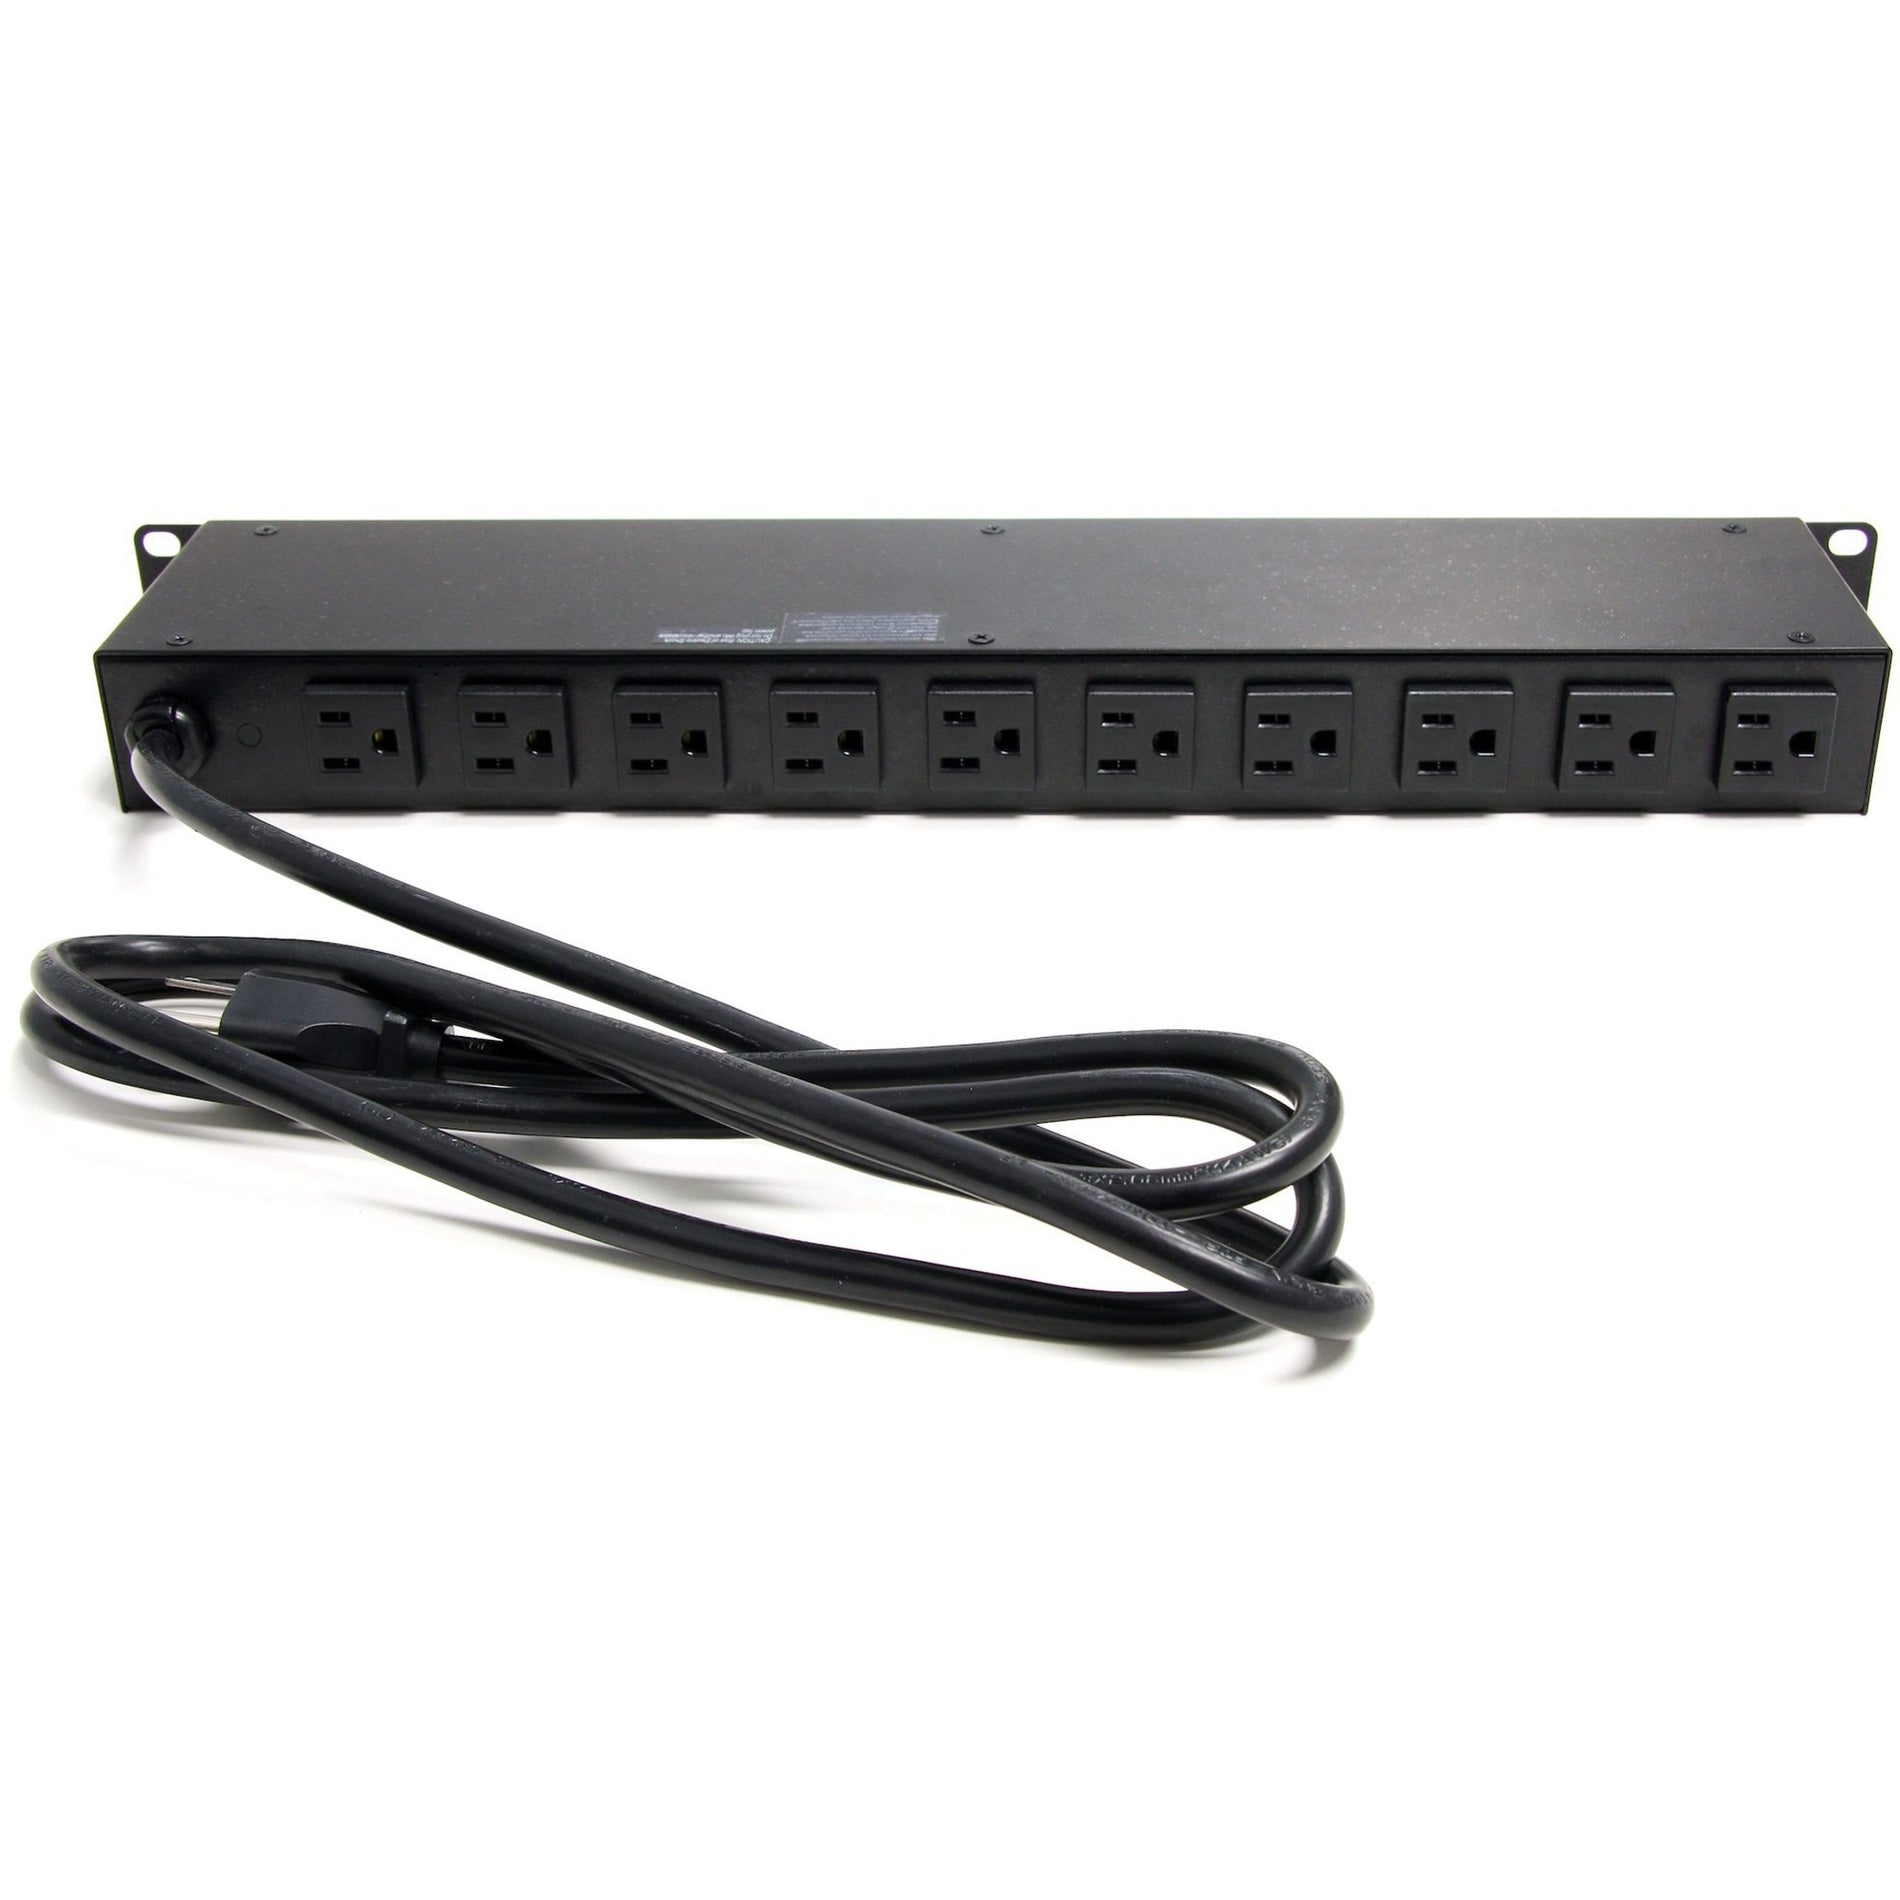 StarTech.com RKPW161915 Rackmount PDU with 16 Outlets and SurgeProtection - 1U, 15A, 120V AC